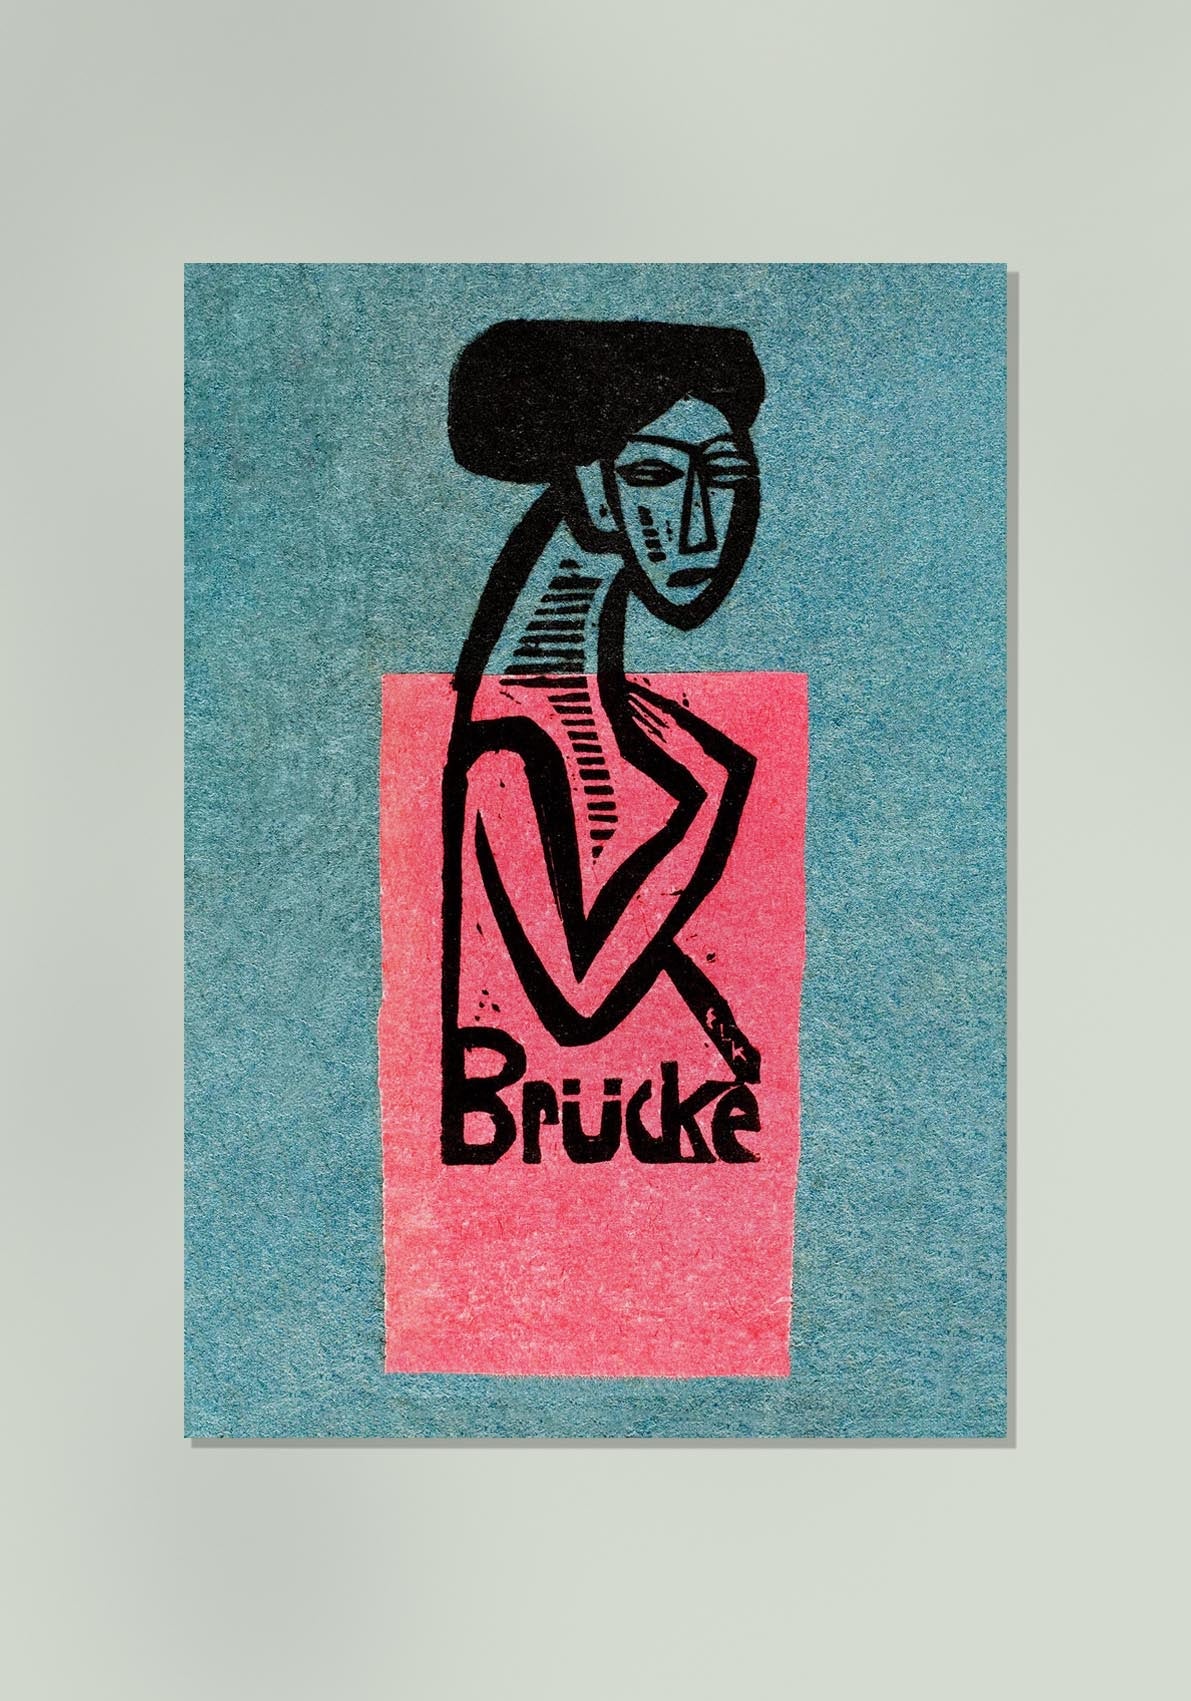 Exhibition Poster of The Bridge by Ernst Kirchner